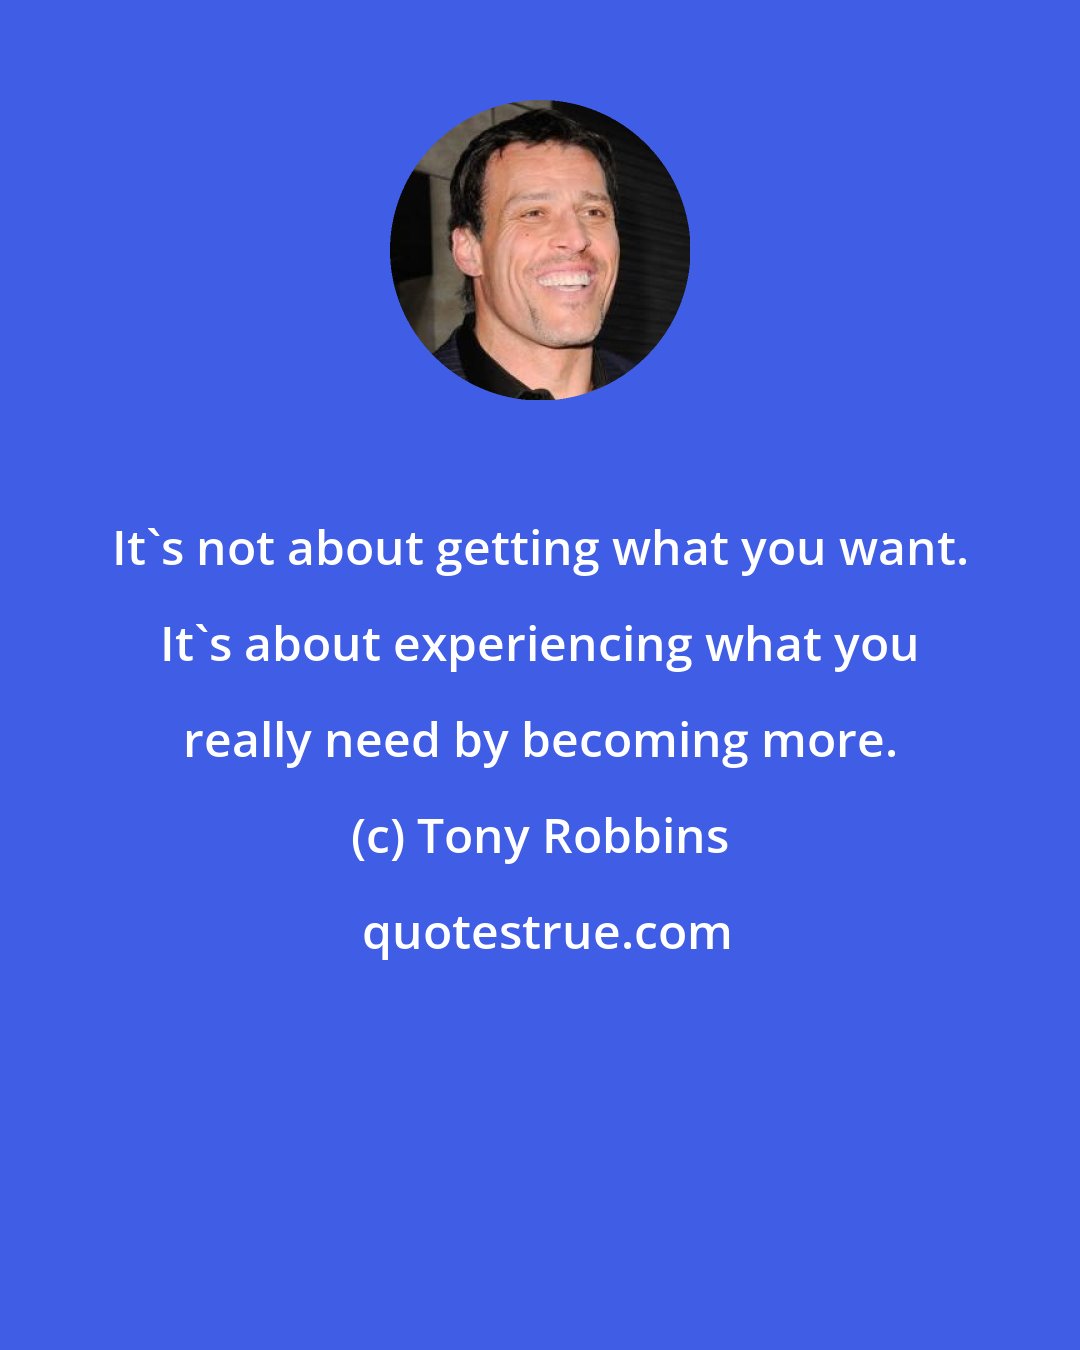 Tony Robbins: It's not about getting what you want. It's about experiencing what you really need by becoming more.